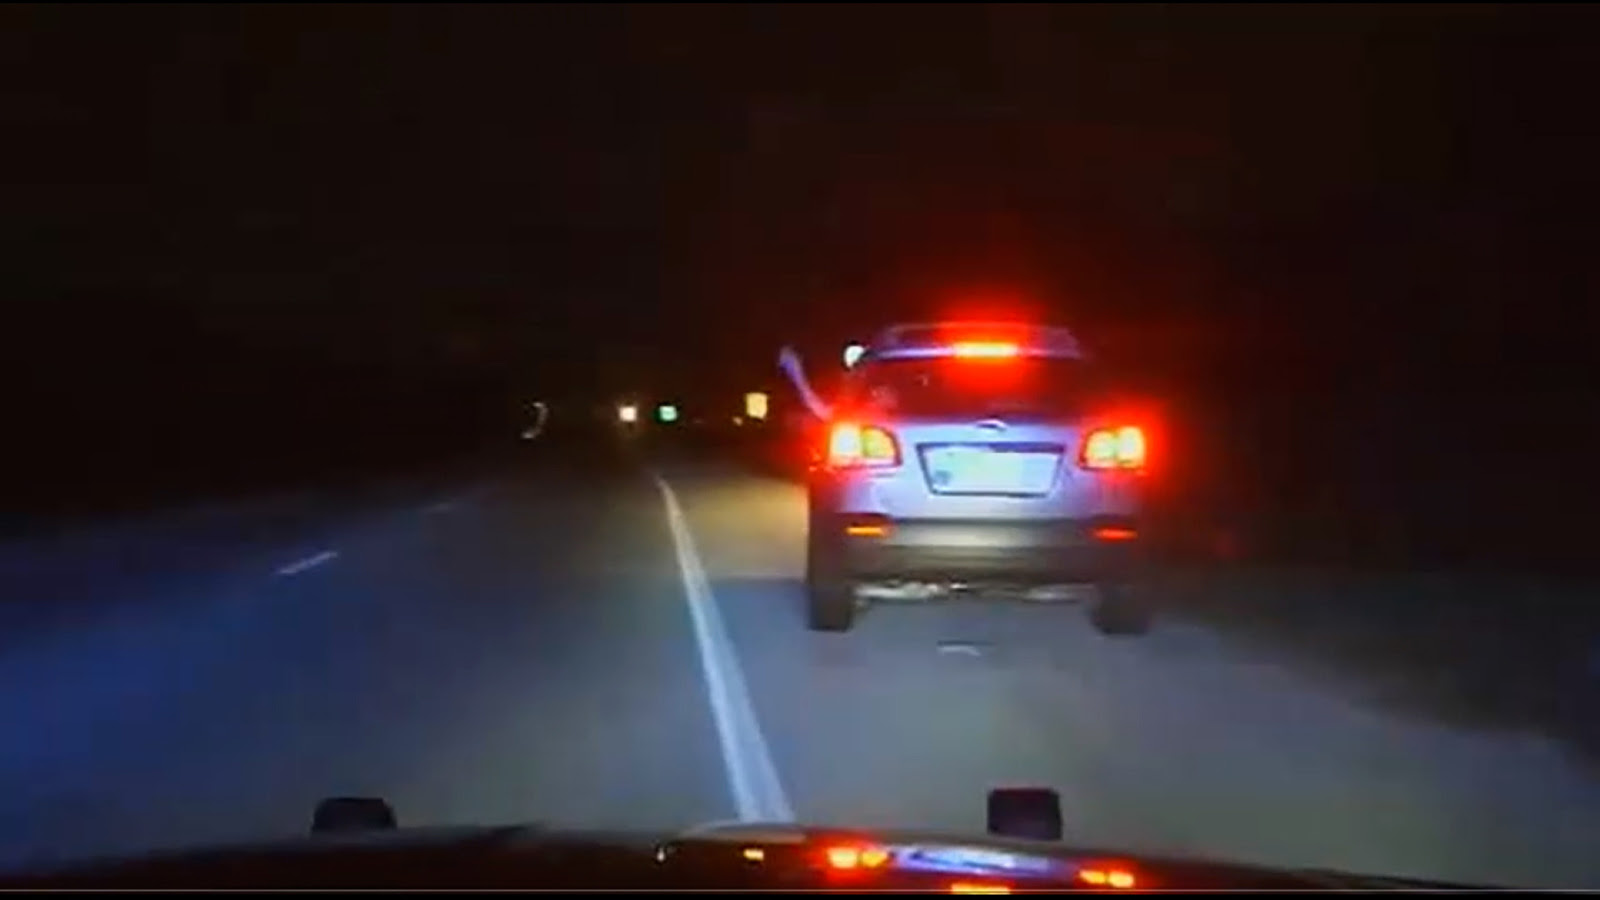 Officers pulling over the vehicle as seen from their dash cam